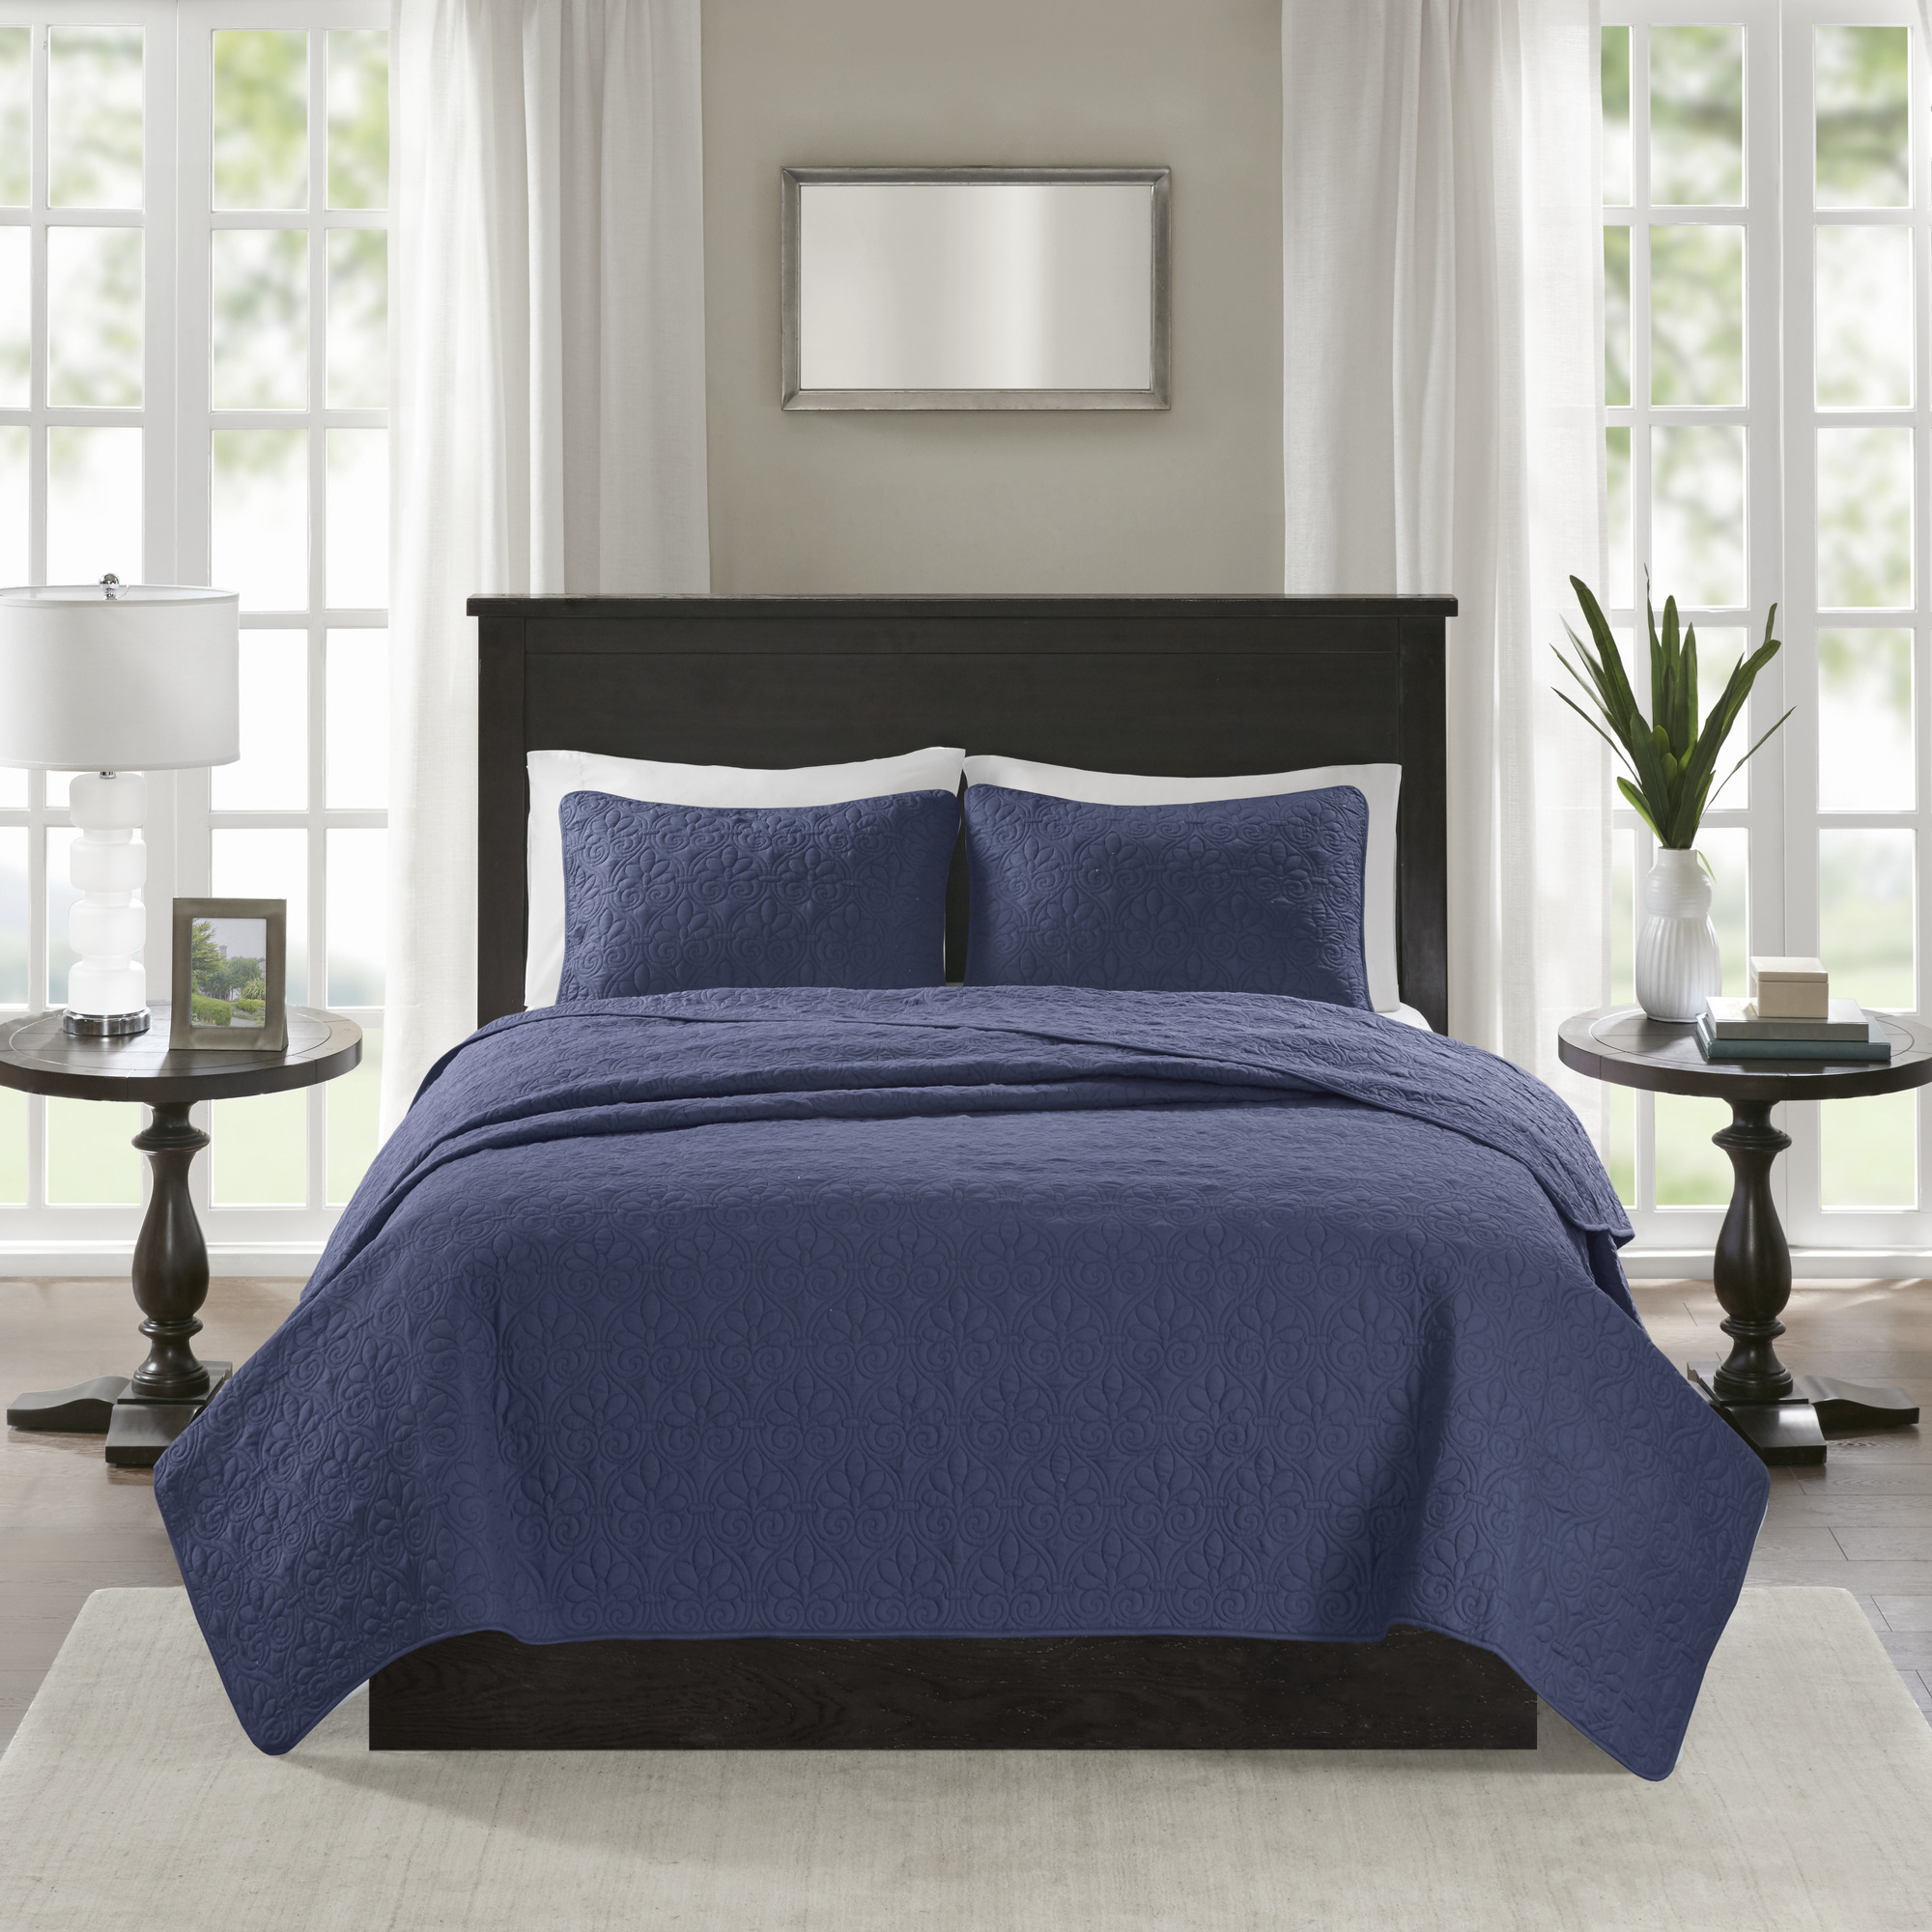 Home Essence Vancouver Super Soft Reversible Coverlet Set, Full/Queen, Navy - image 4 of 13